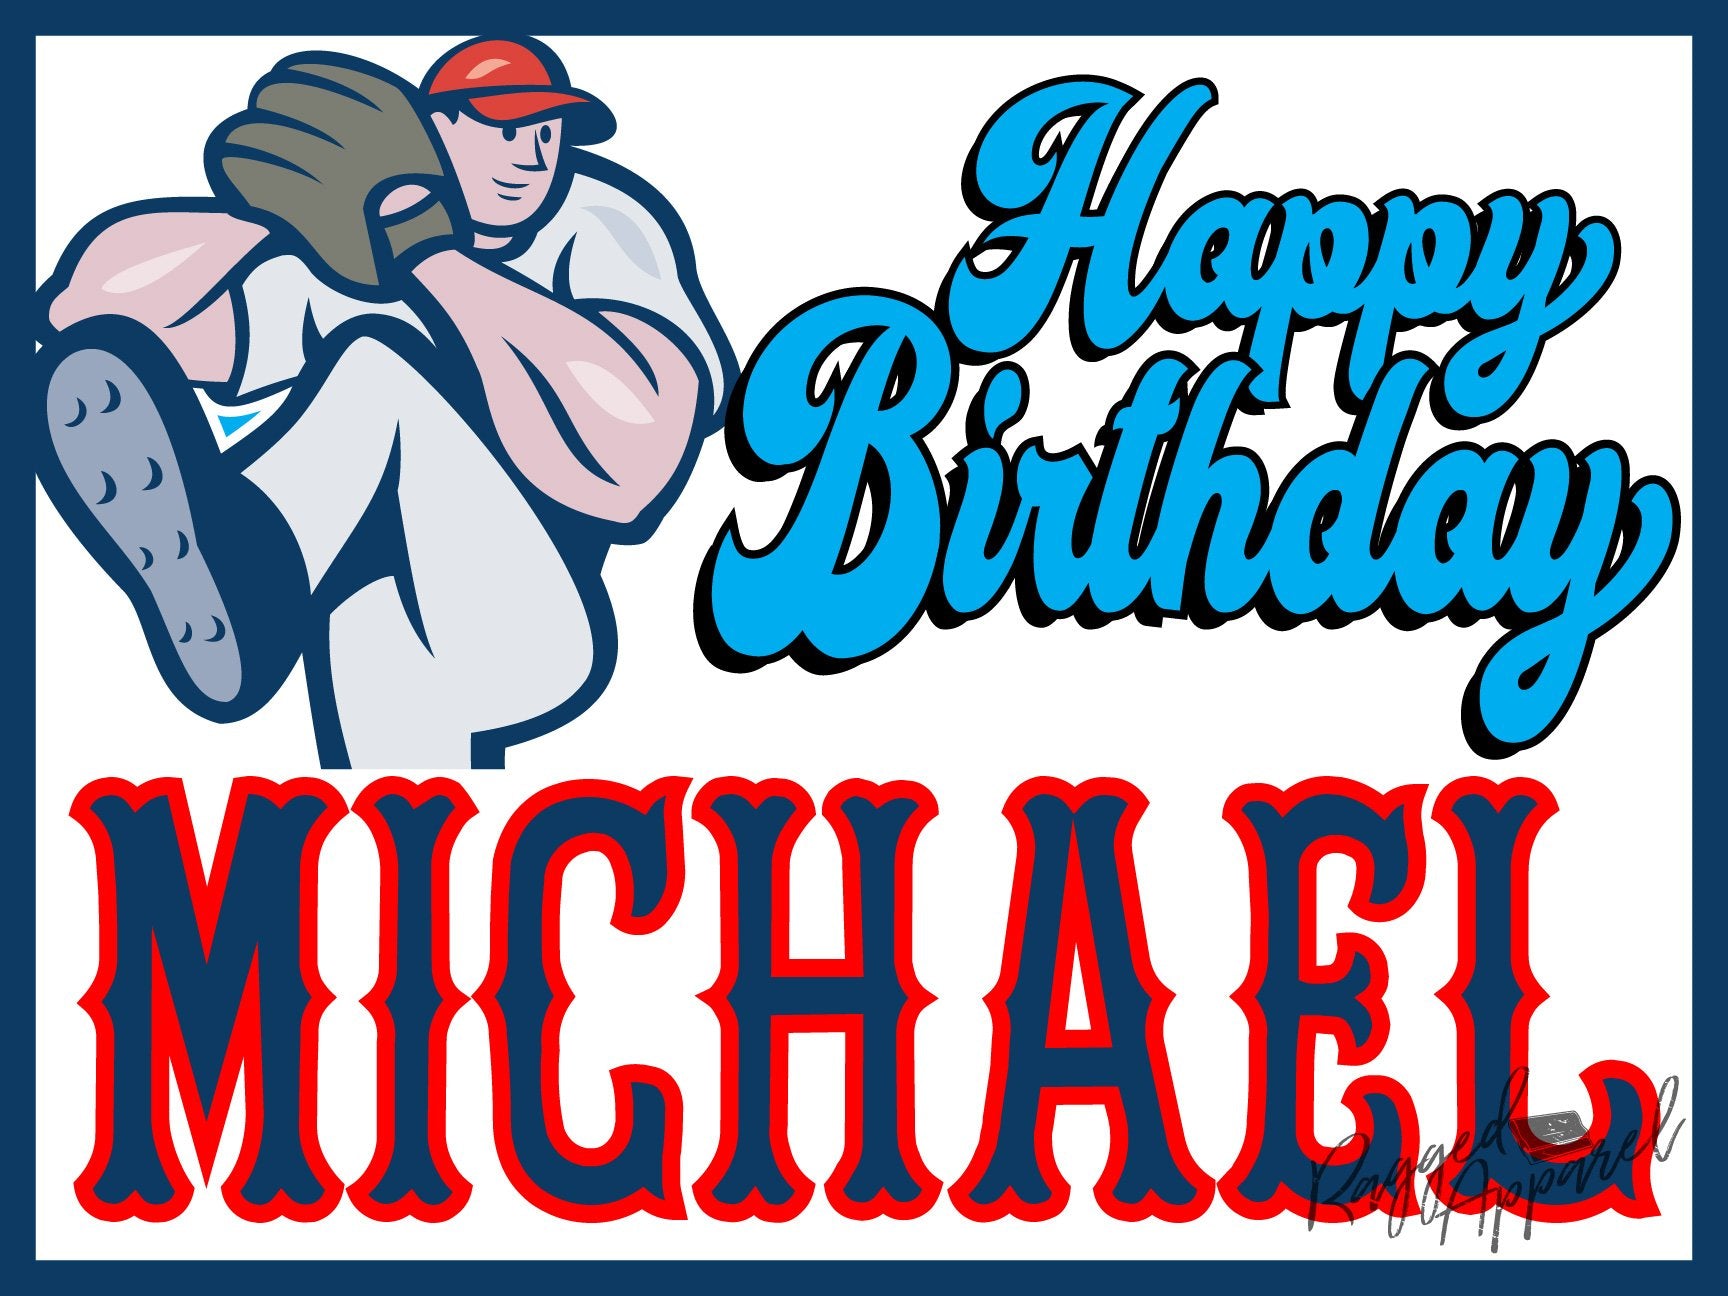 Kids Personalized Baseball Birthday Sign - Ragged Apparel Screen Printing and Signs - www.nmshirts.com